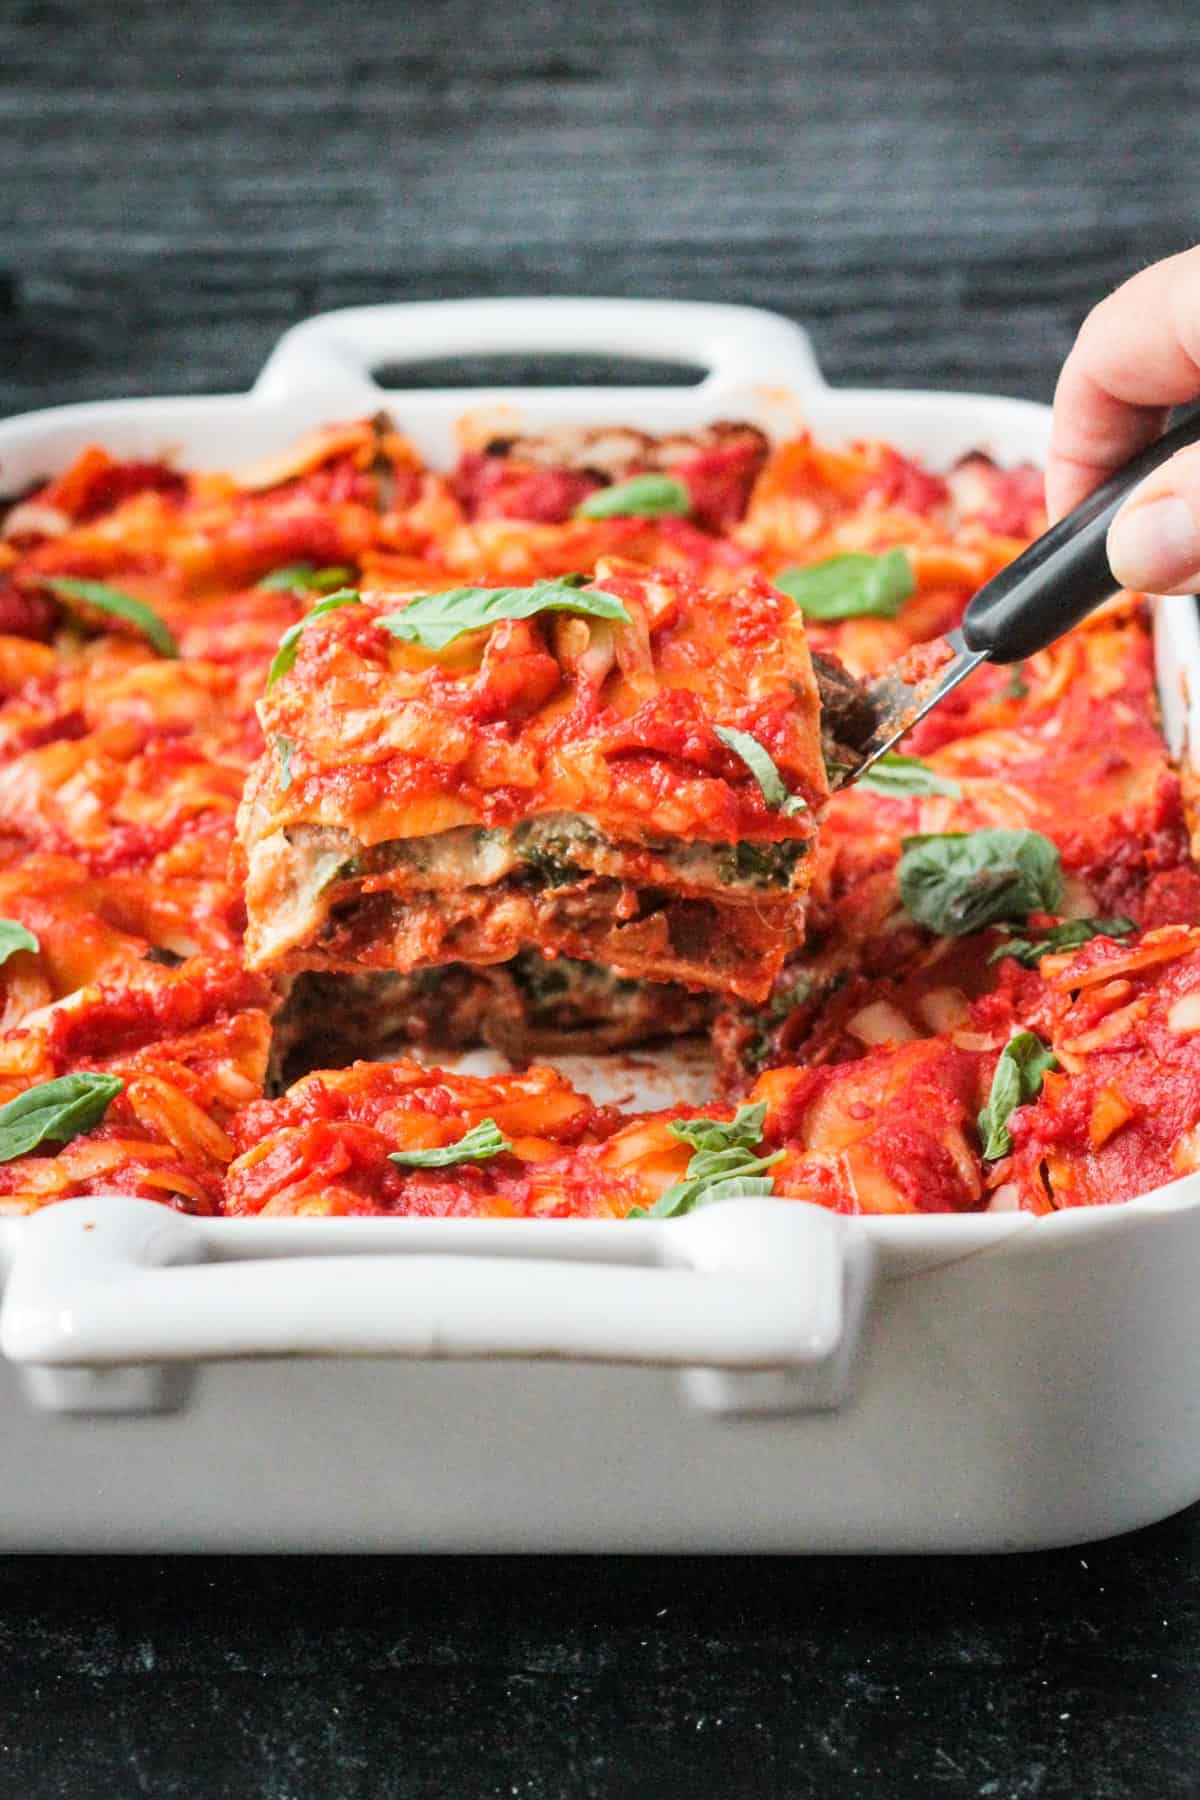 A slice of vegetable lasagna on a spatula being lifted out of the baking dish.